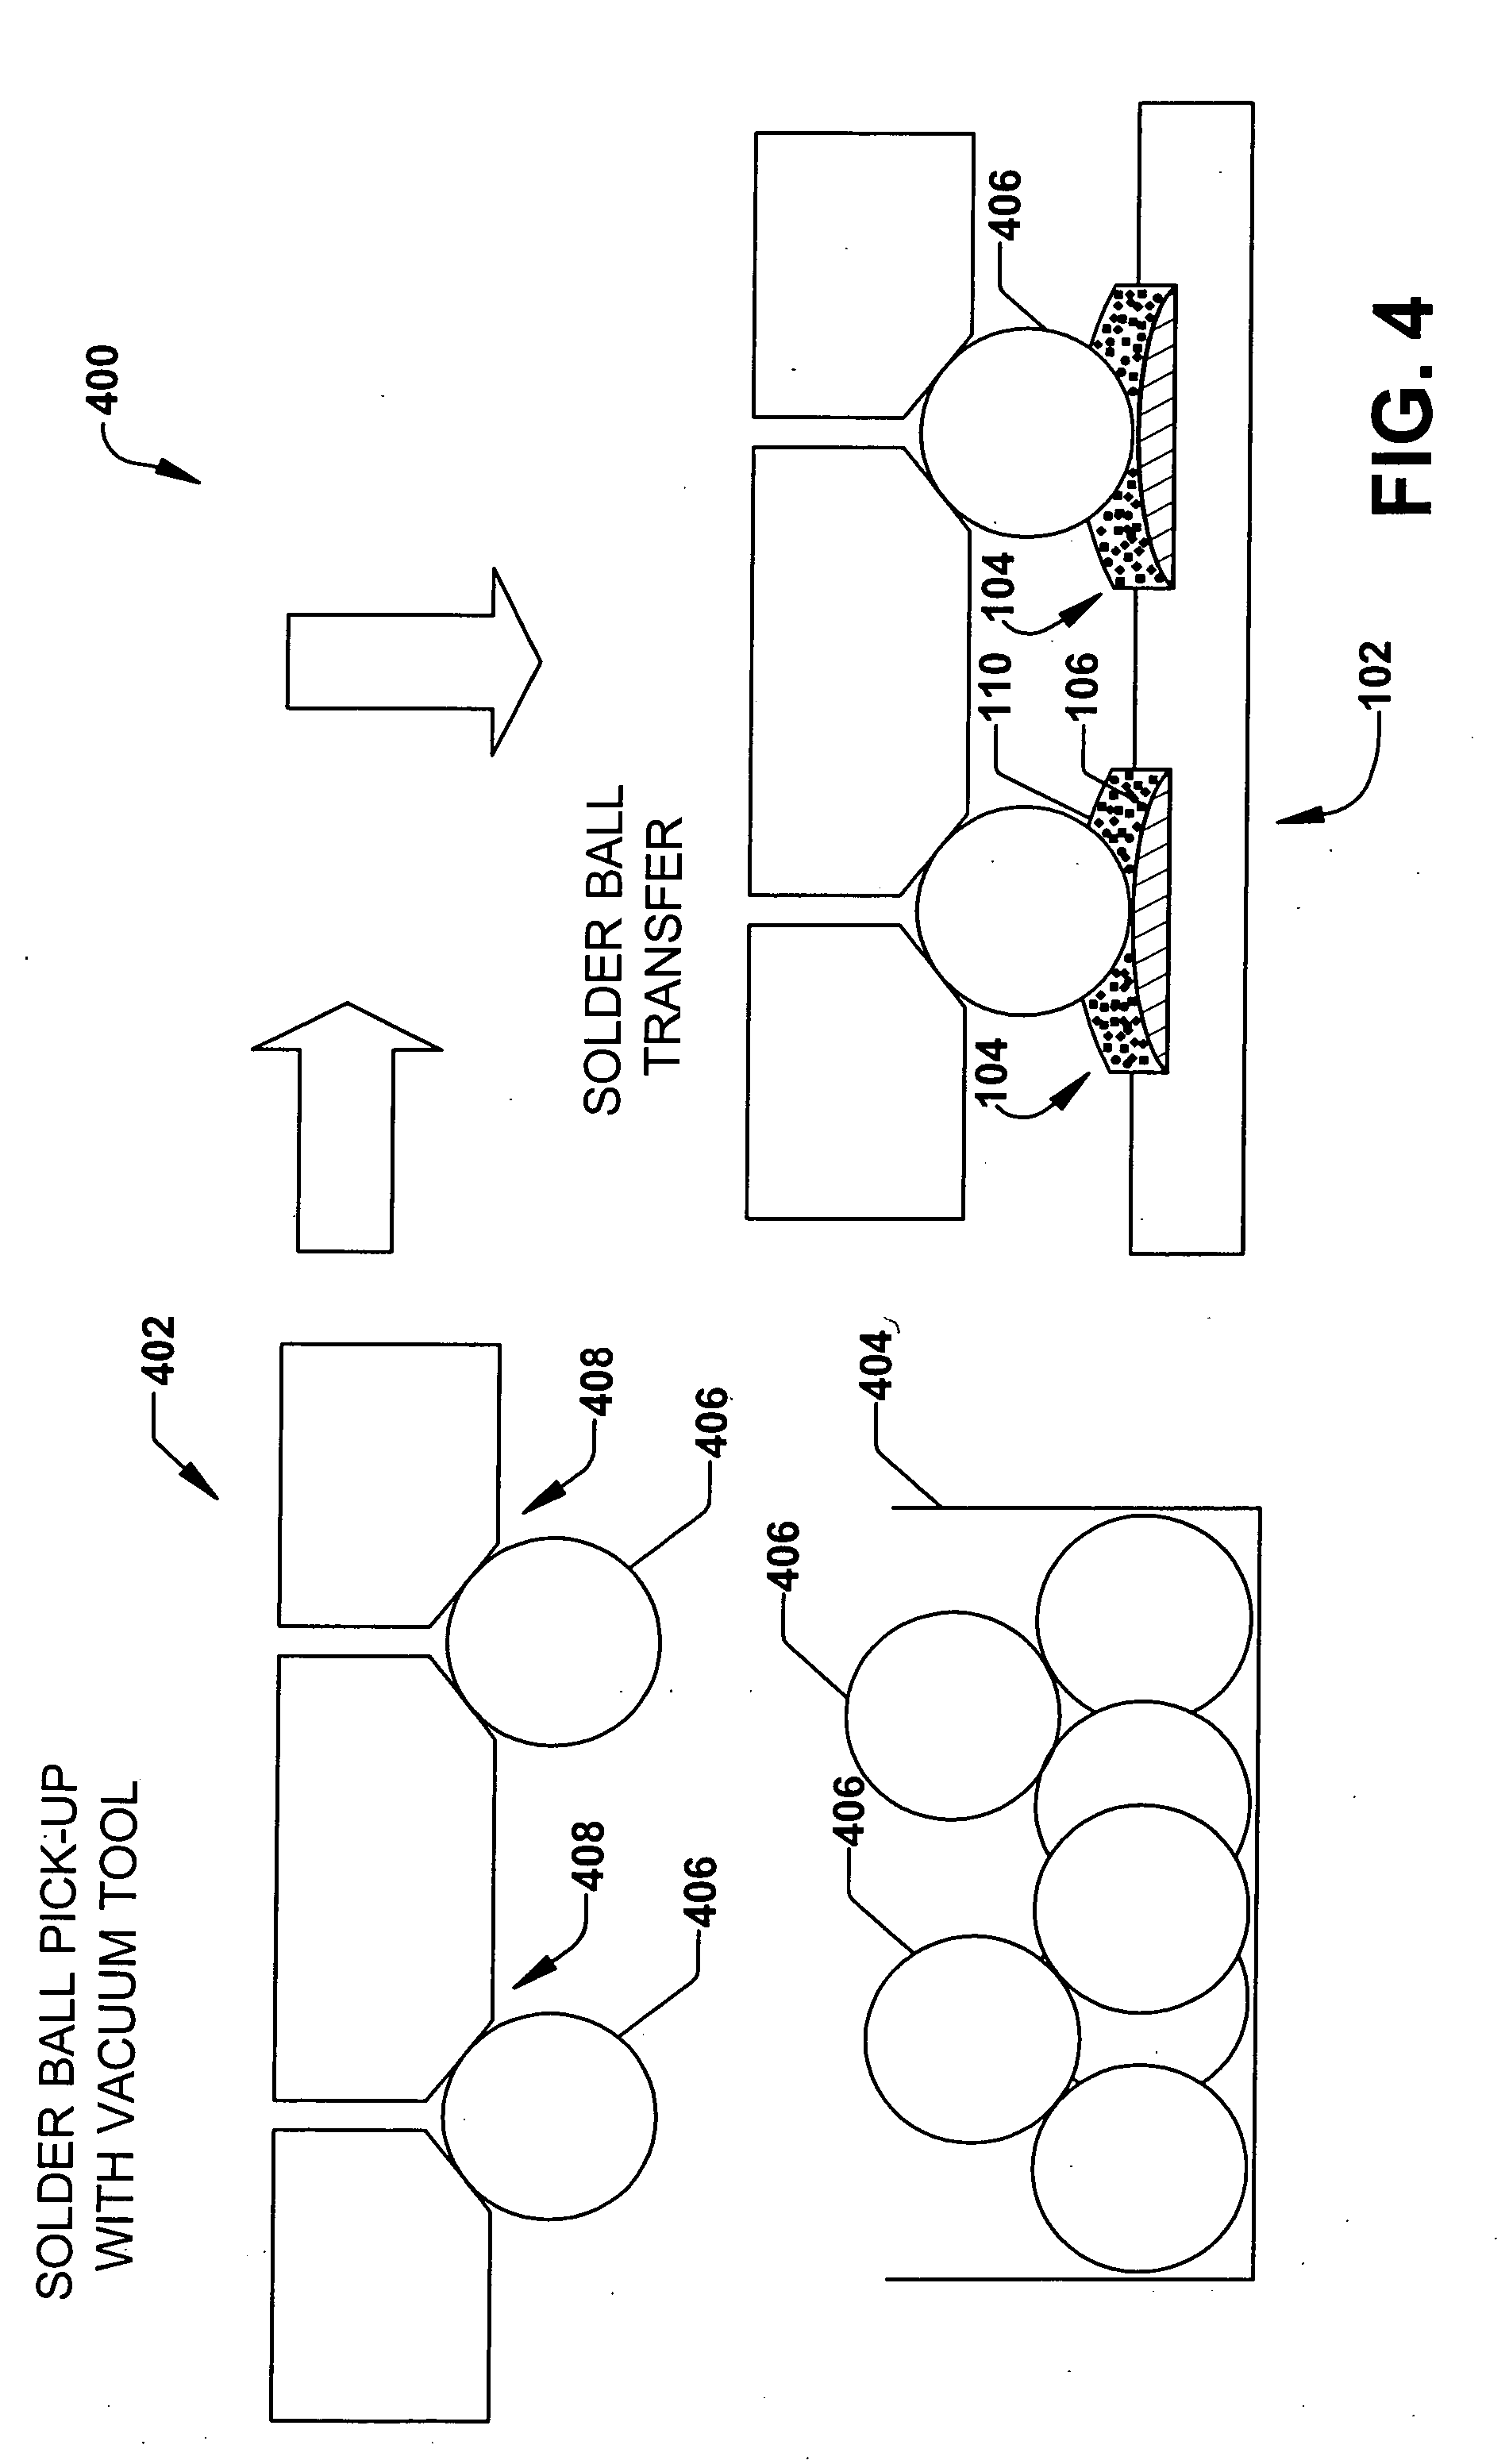 Method and apparatus for attaching solder balls to substrate